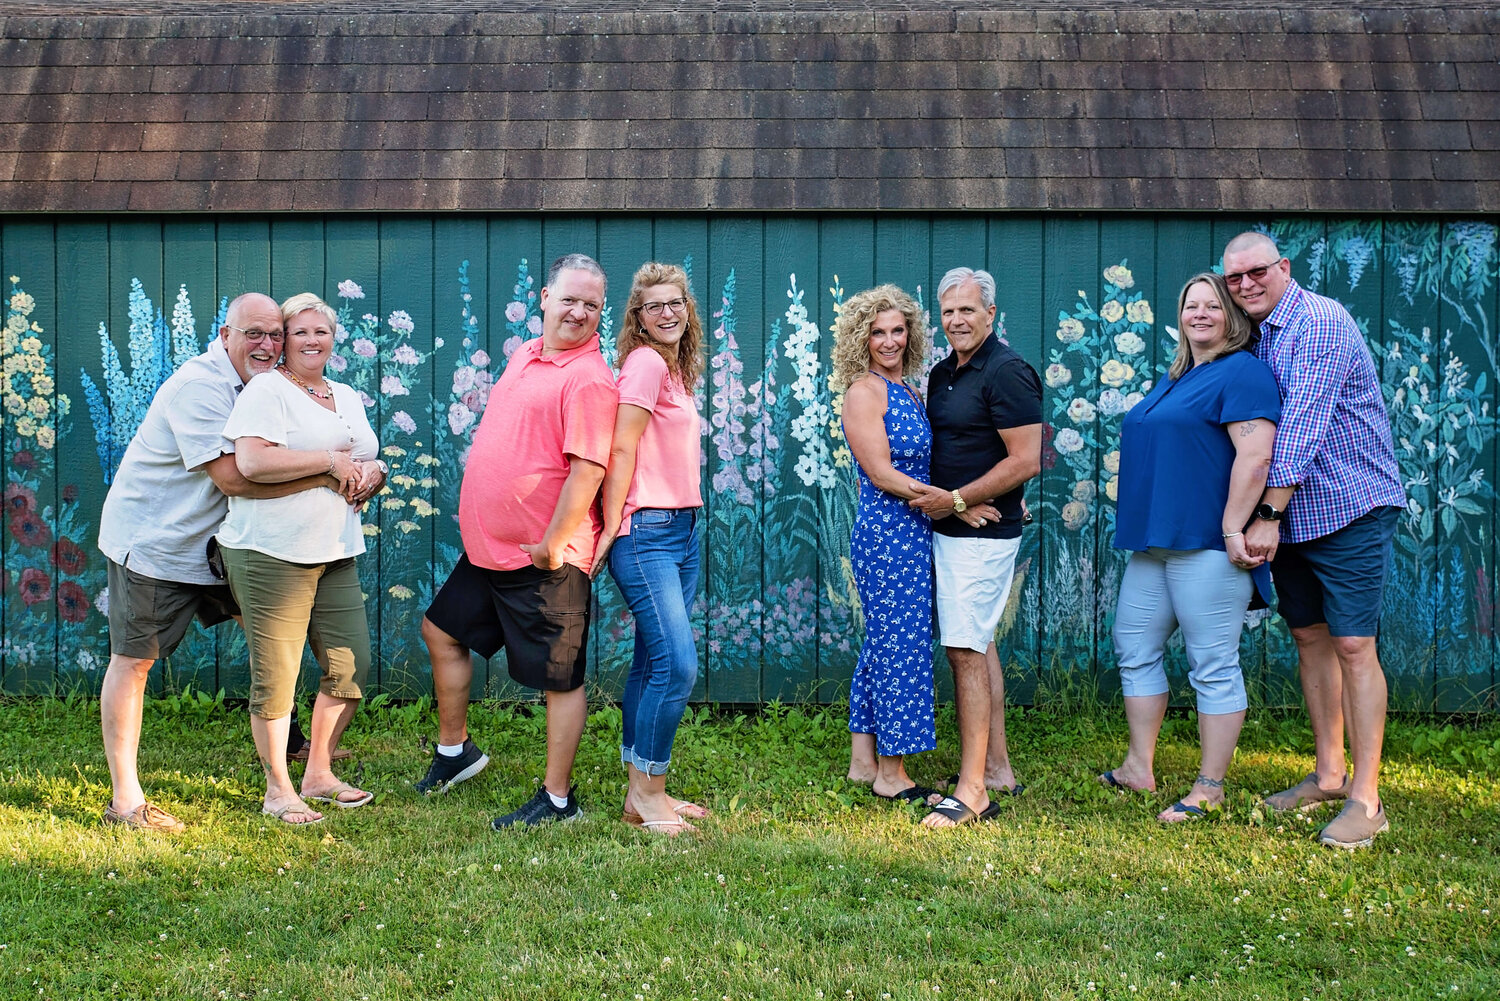 From left to right (status as of June 2020): Ann & Bob - 7 kids and 2 grand-babiesKim & Tom - moving to NCMarlene & Andy - love to travel (later that year I also had the honor to photograph their backyard wedding - a surprise!)Bridget & Ray - 5 kids and 1 grand-baby